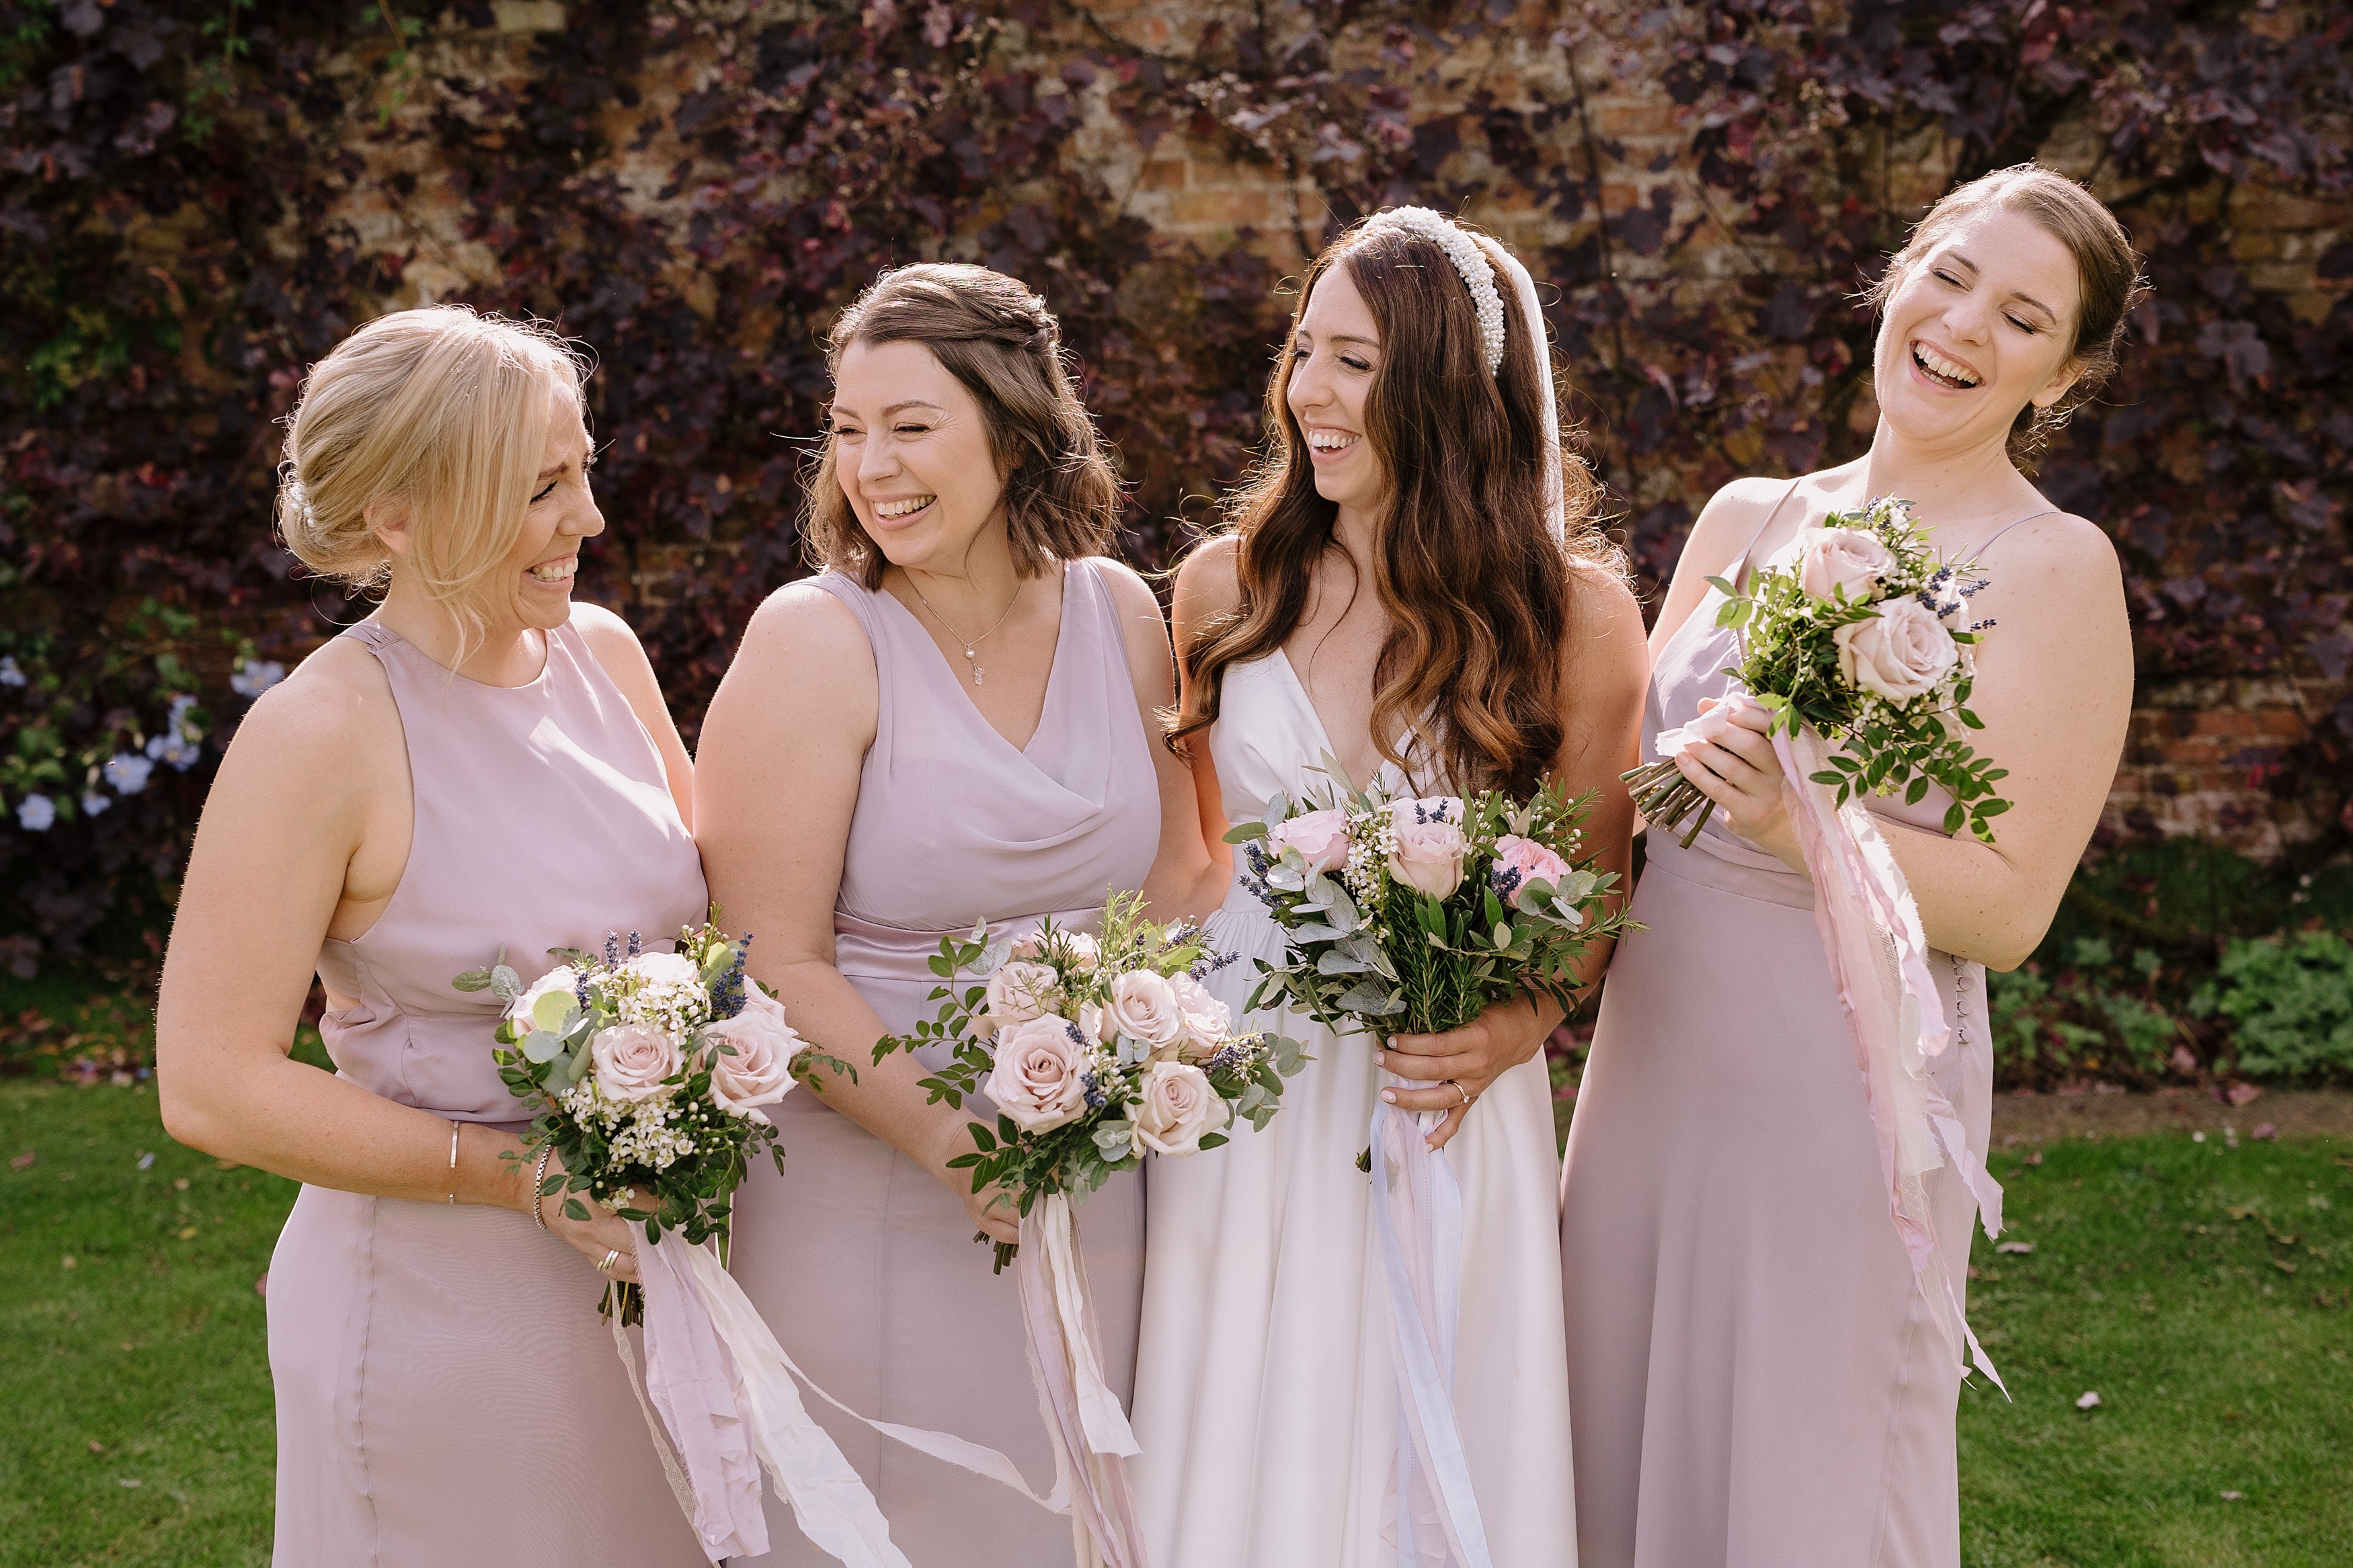 A bride laughing with her bridesmaids, all holding bouquets